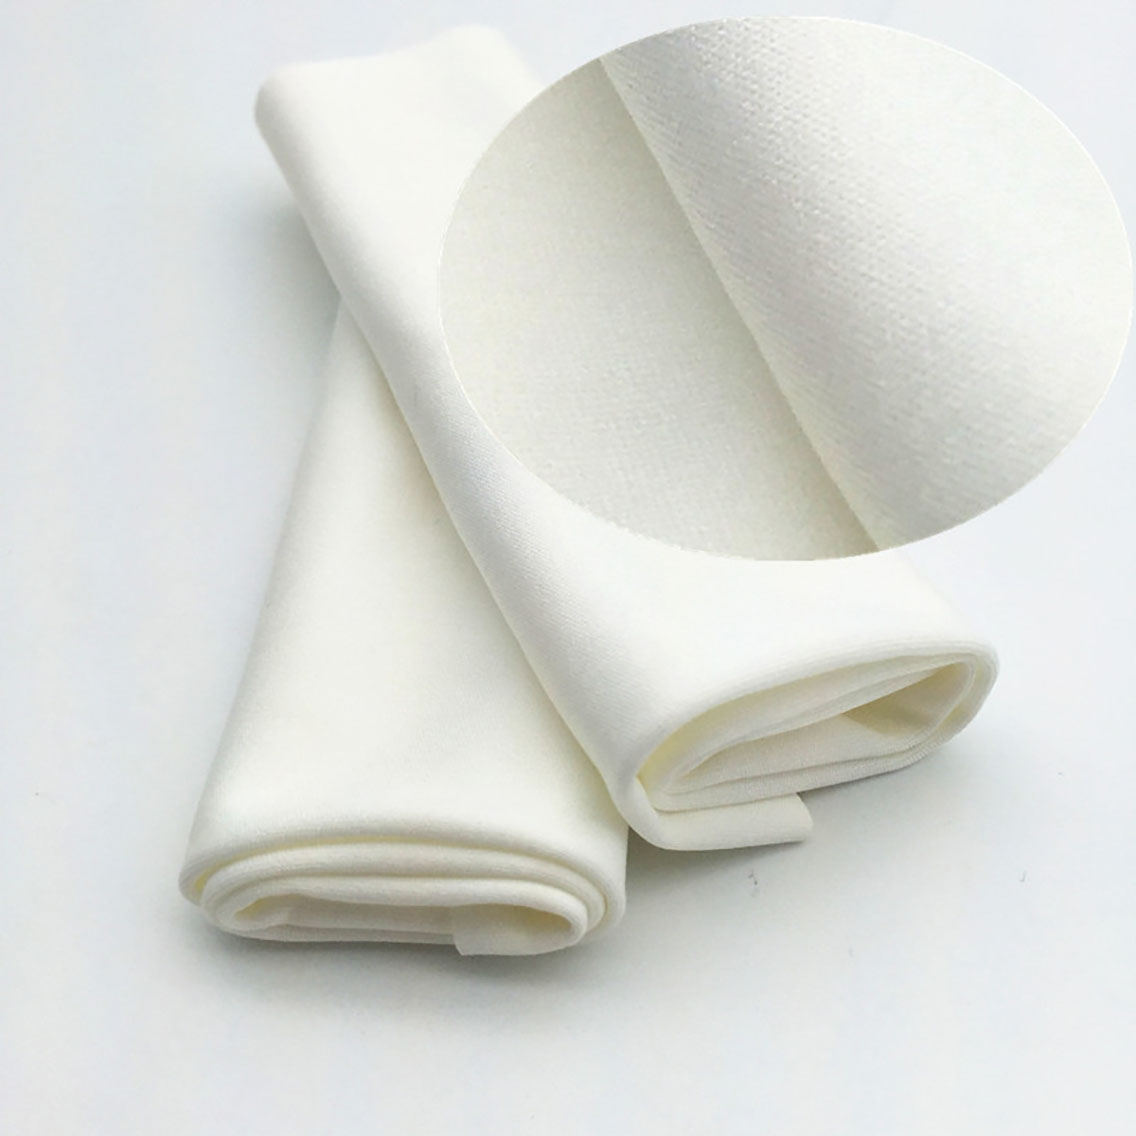 Cleanmo good quality lens cloth factory for medical device products-2